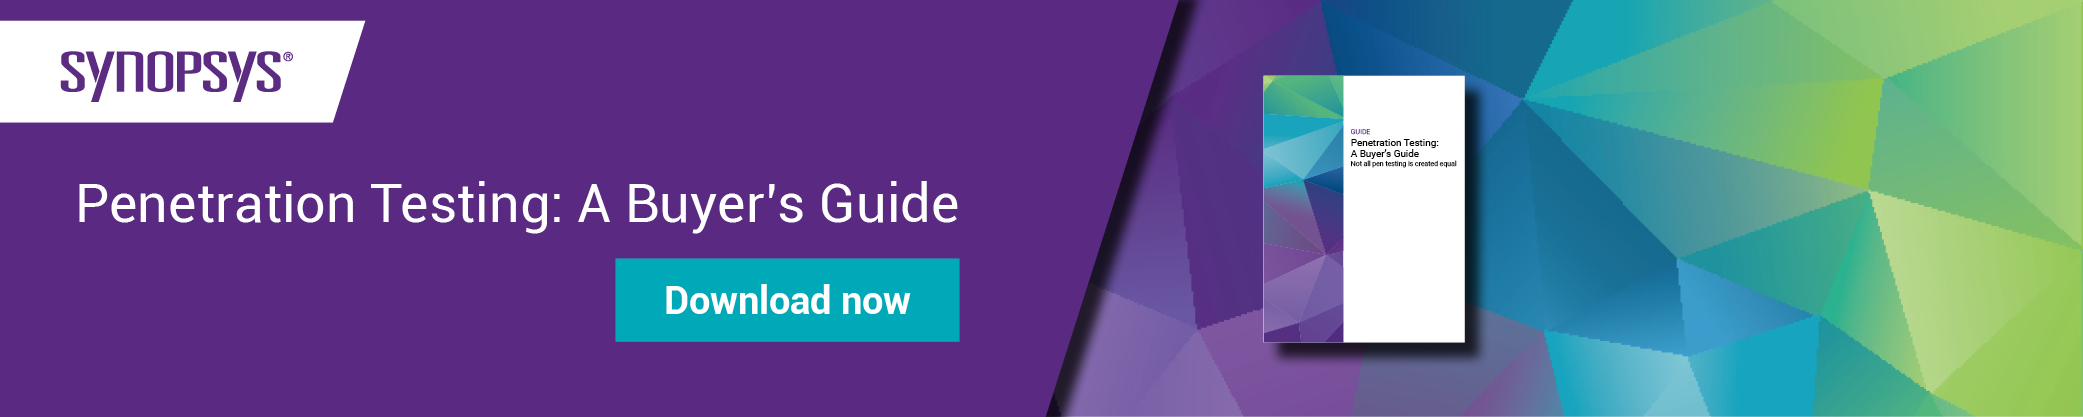 Penetration testing: A Buyer's Guide | Synopsys